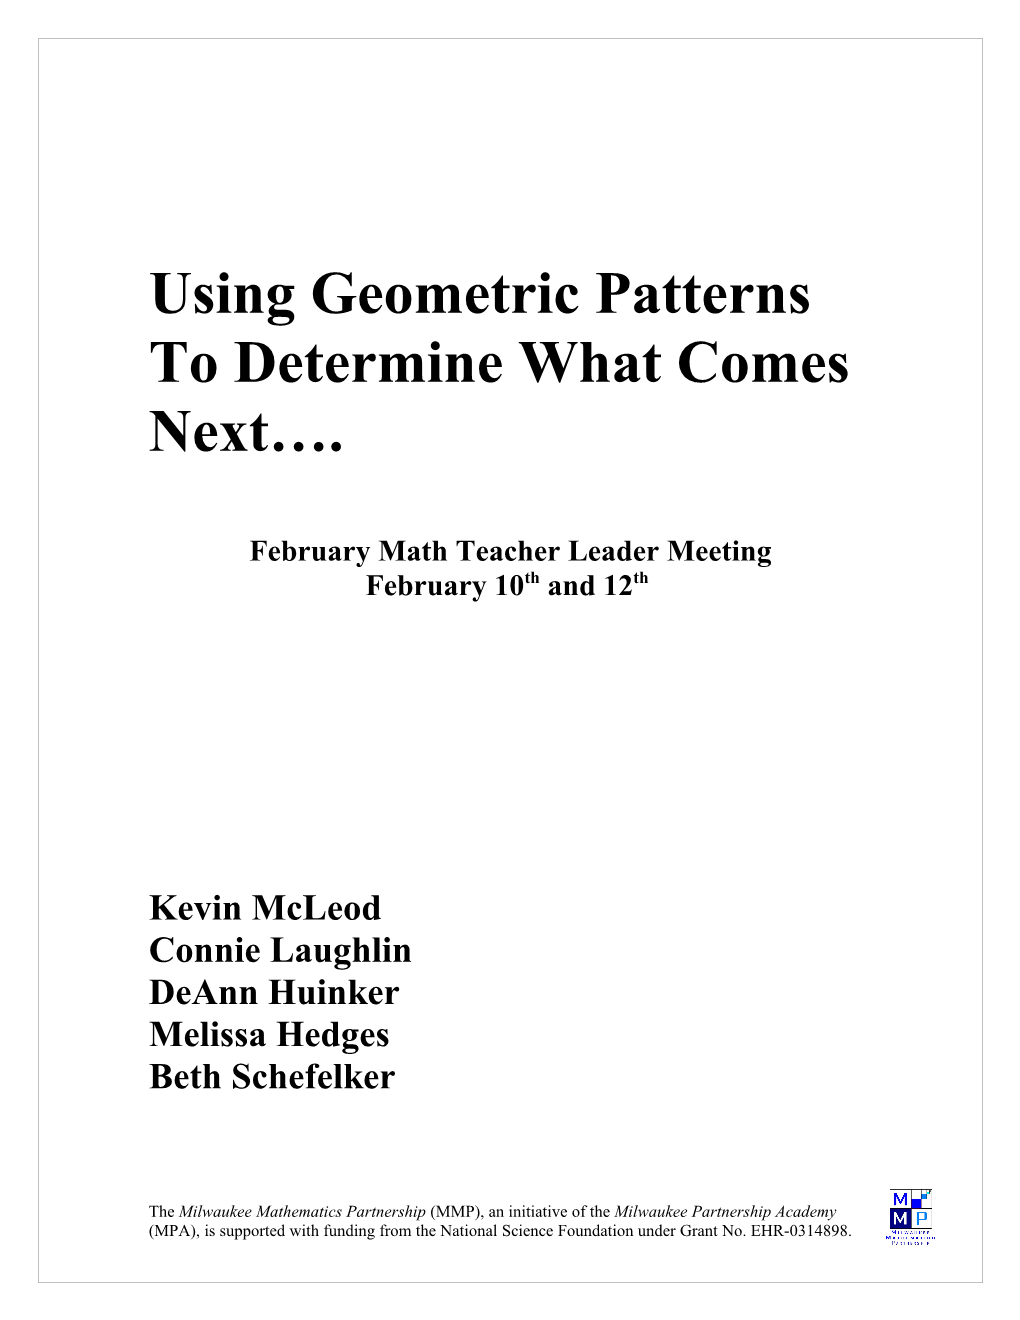 Using Geometric Patterns to Determine What Comes Next